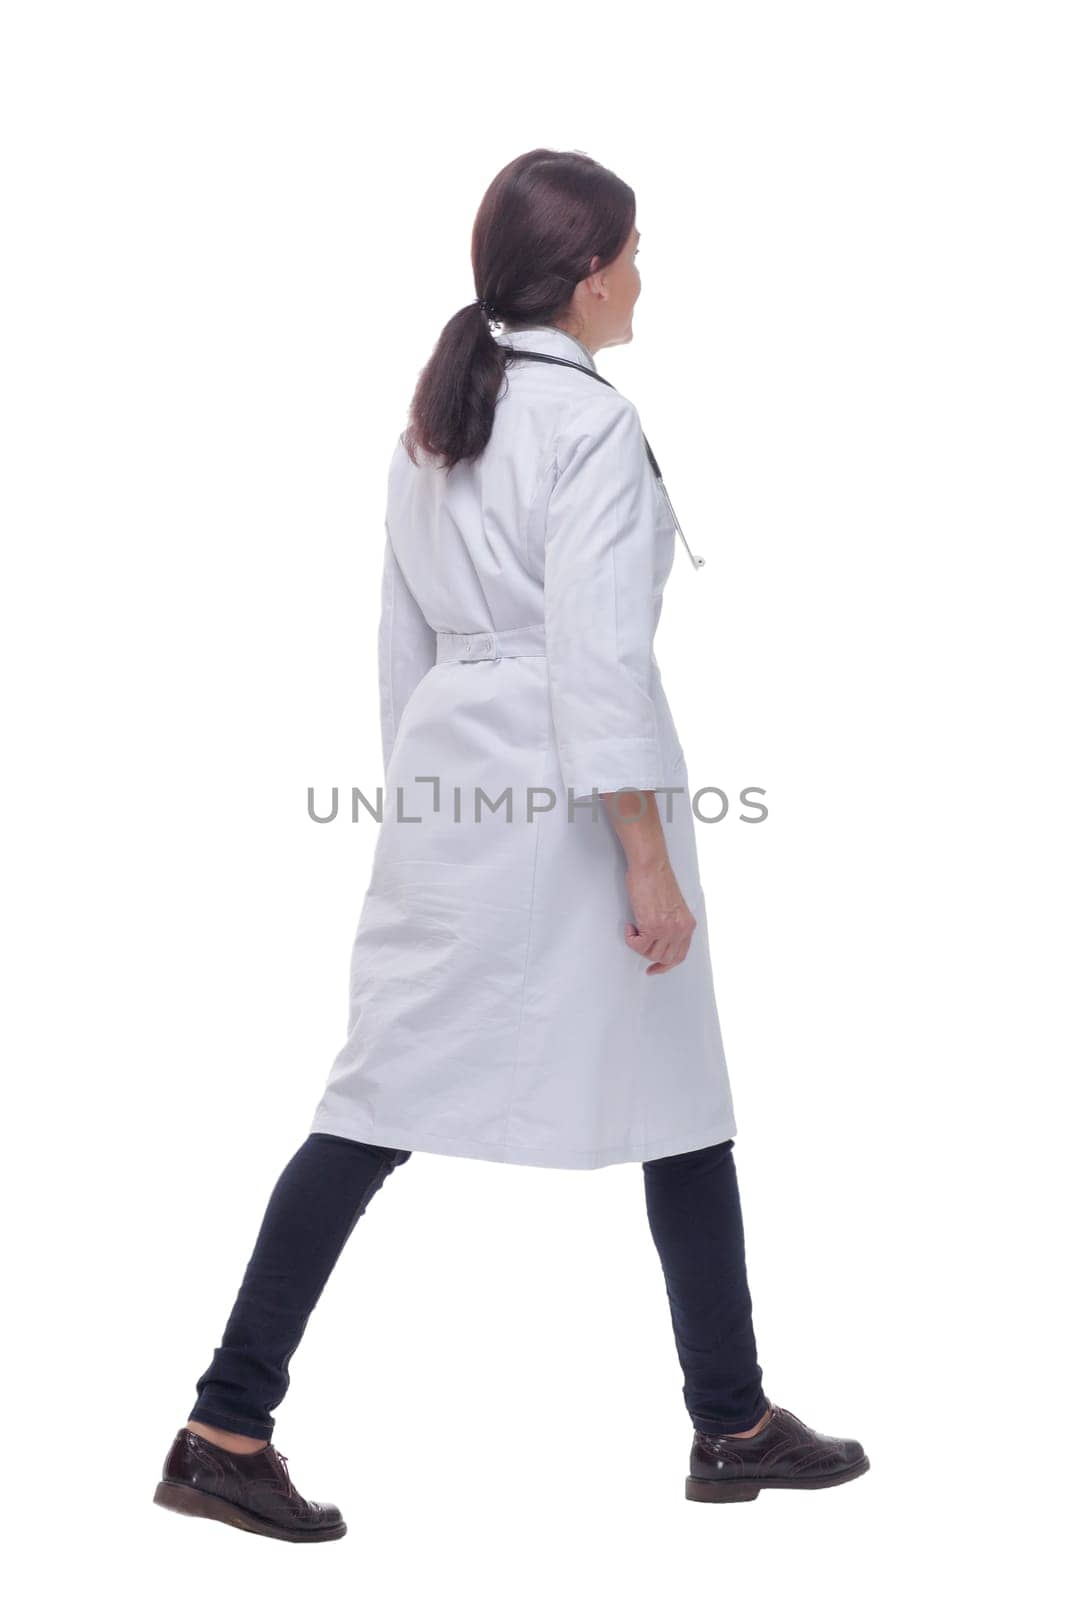 Confident medical doctor woman stepping forward. isolated on white